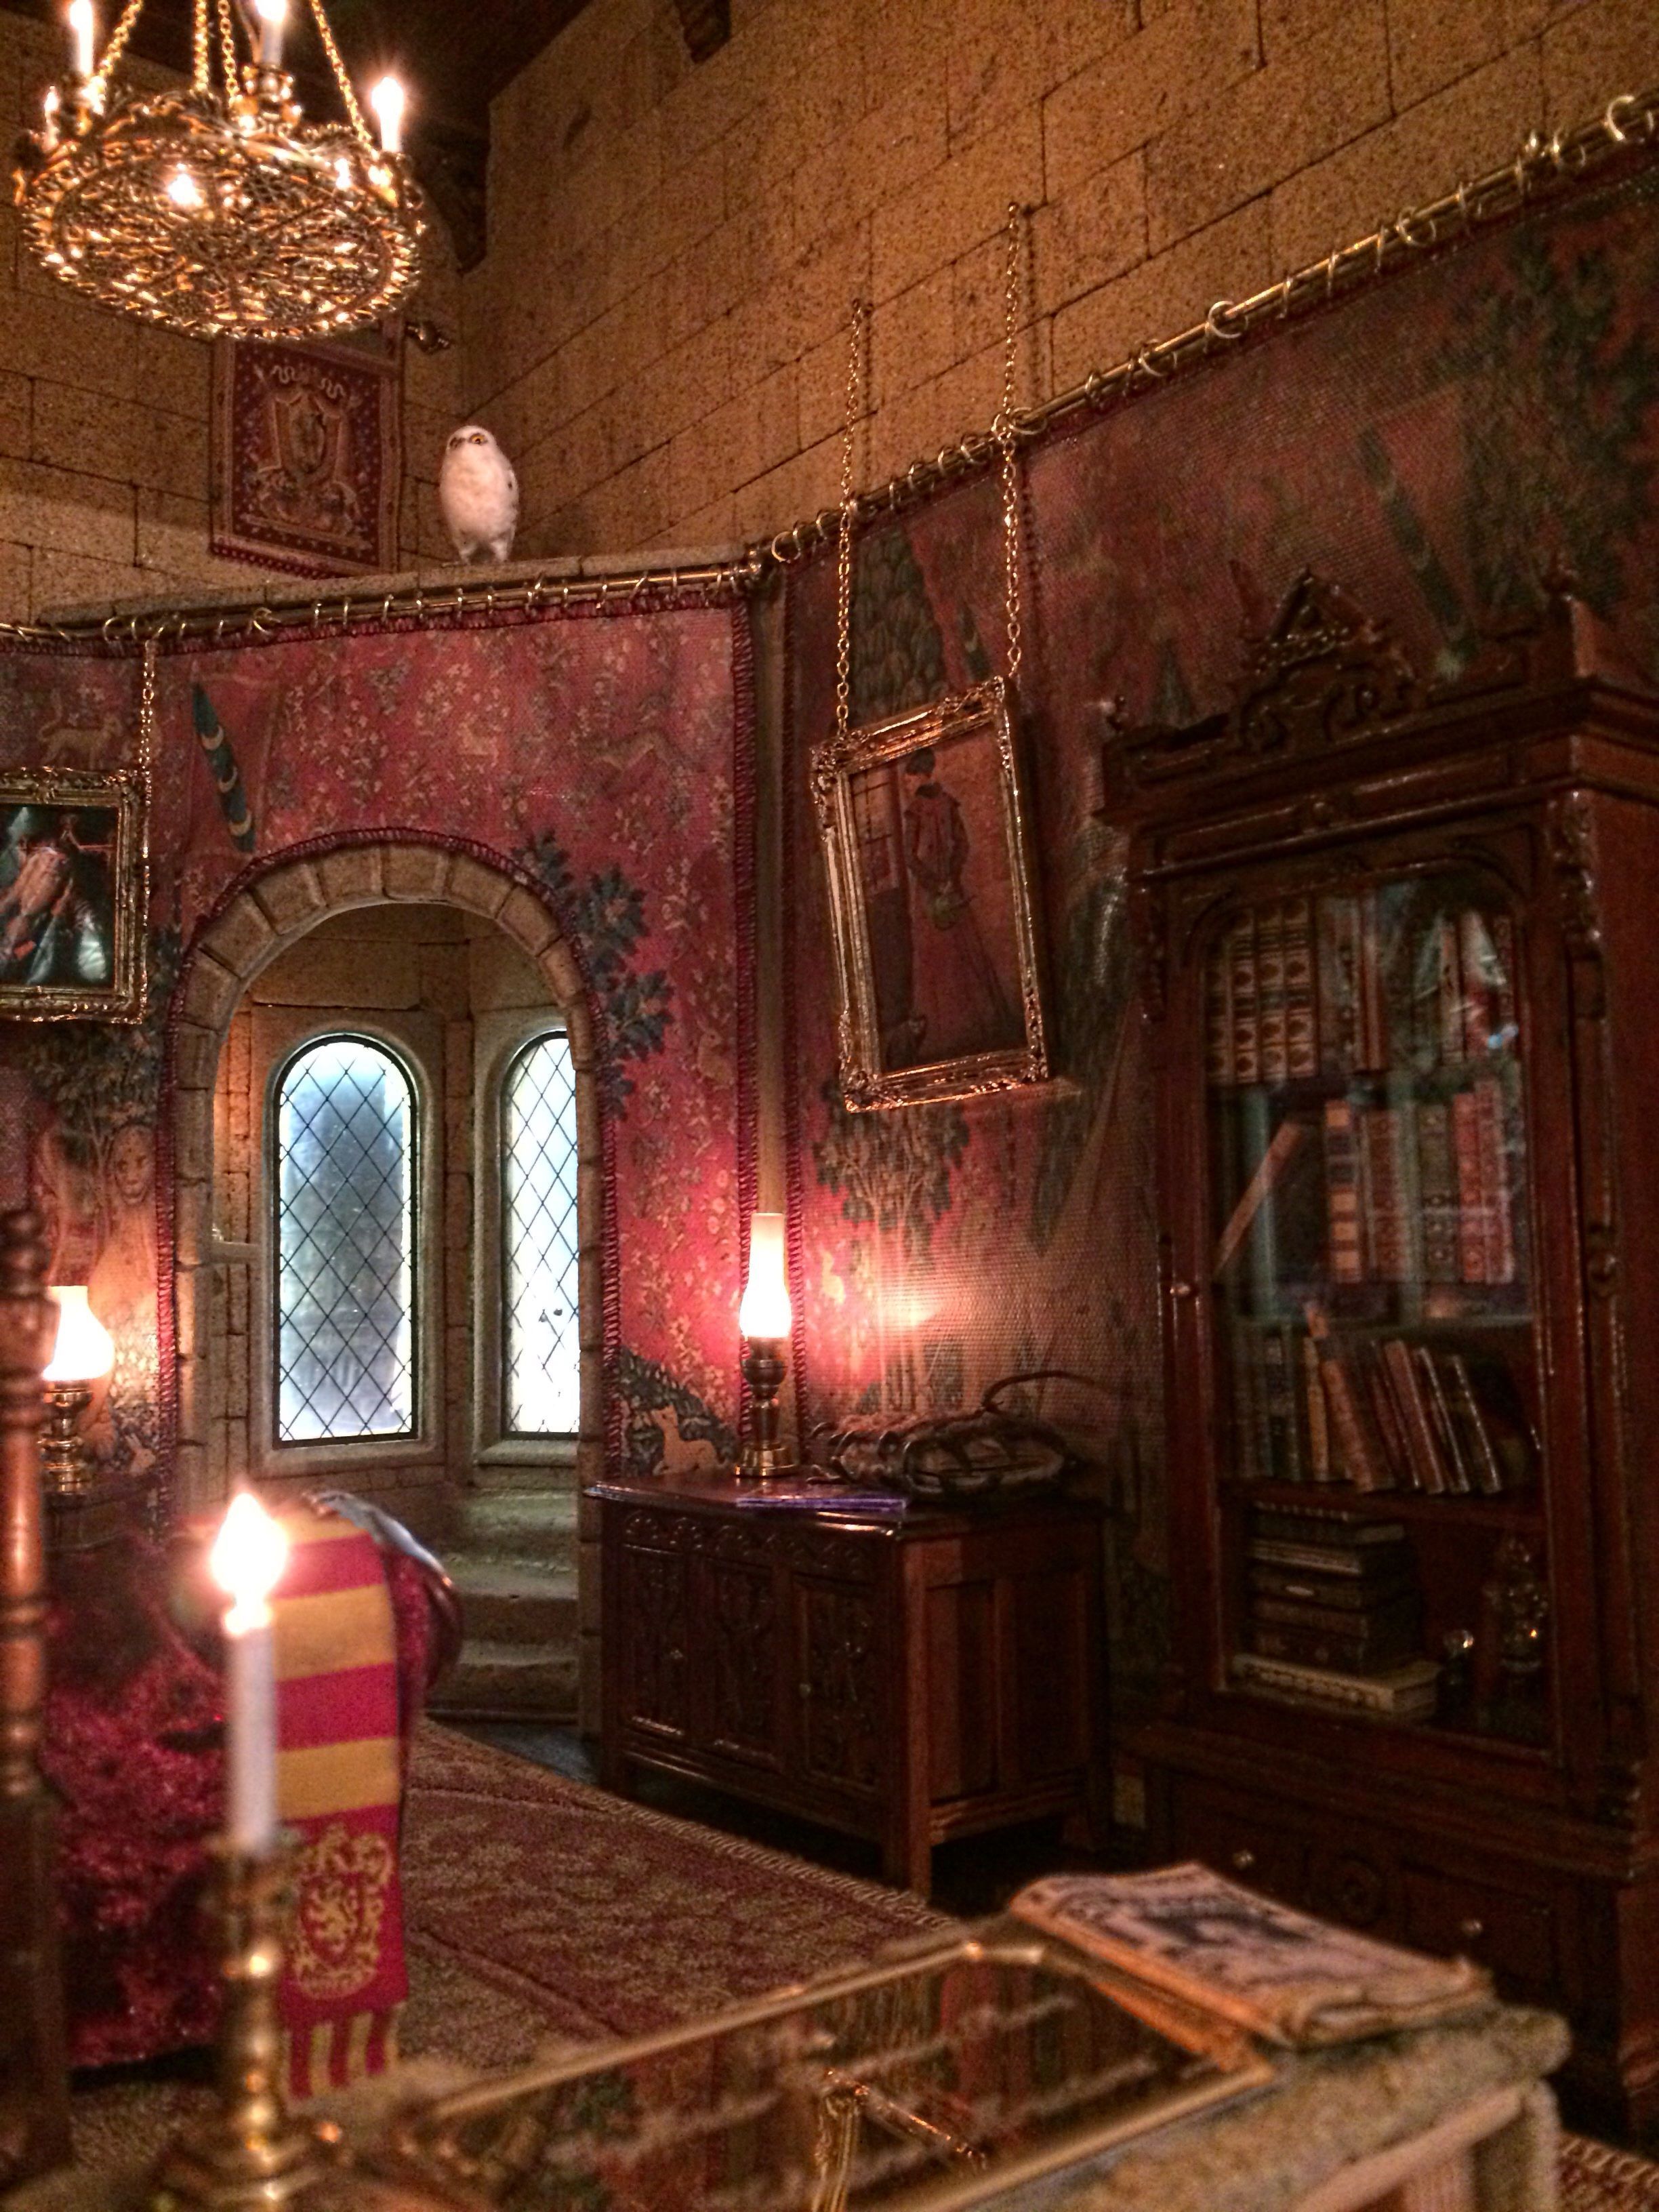 Harry Potter Gryffindor common room. Harry potter bedroom, Gryffindor common room, Harry potter room